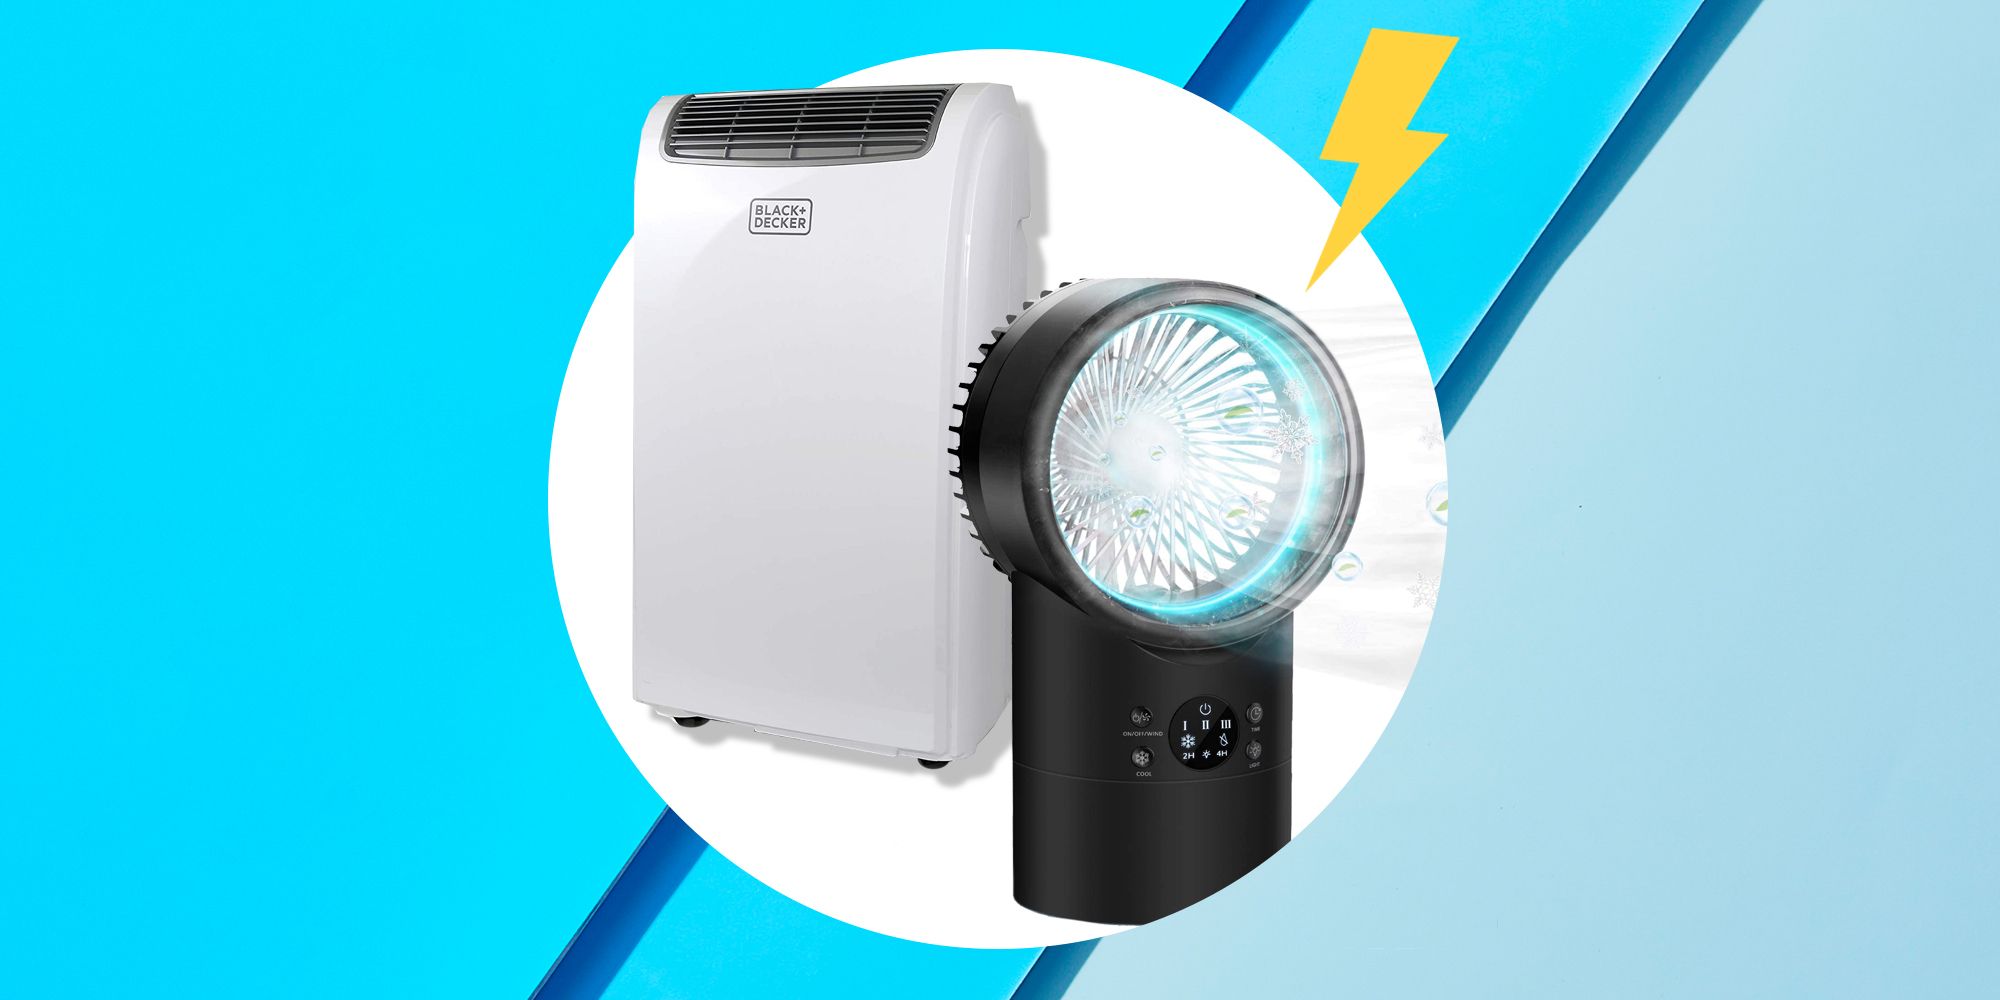 Save Big on Top-Rated Portable Air Conditioners With Wayfair's